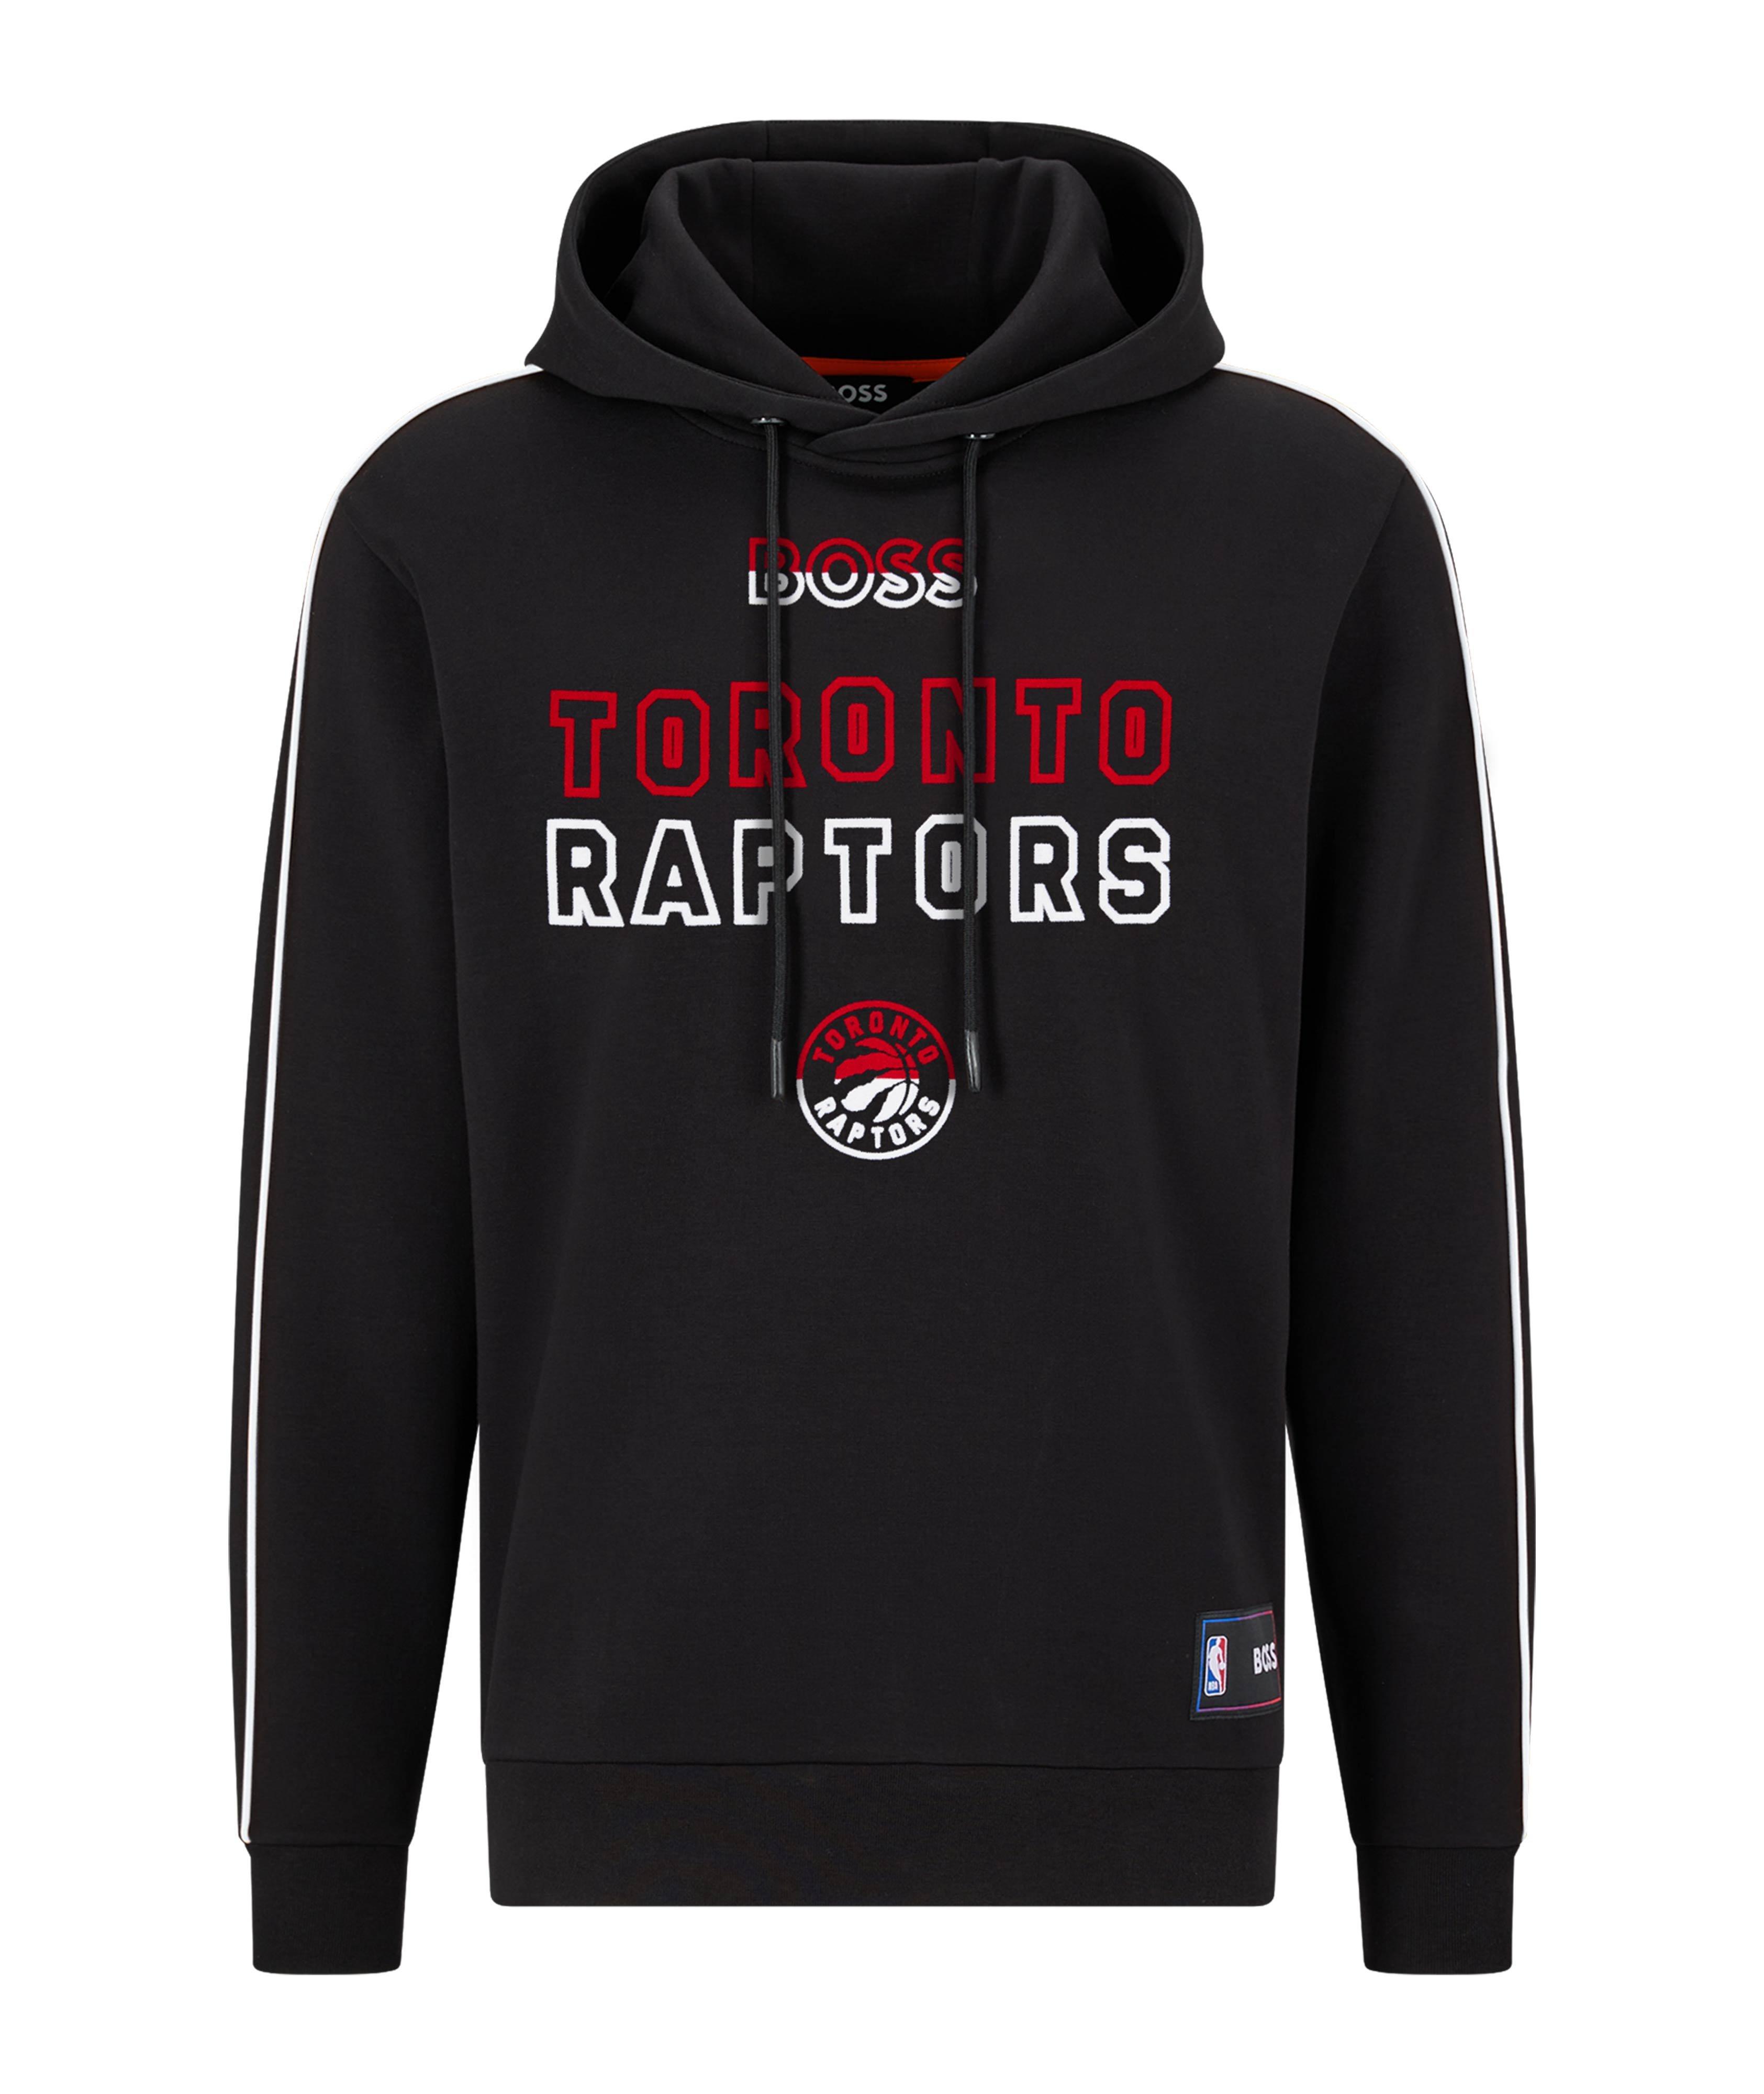 NBA Cotton-Blend Hooded Sweater image 0